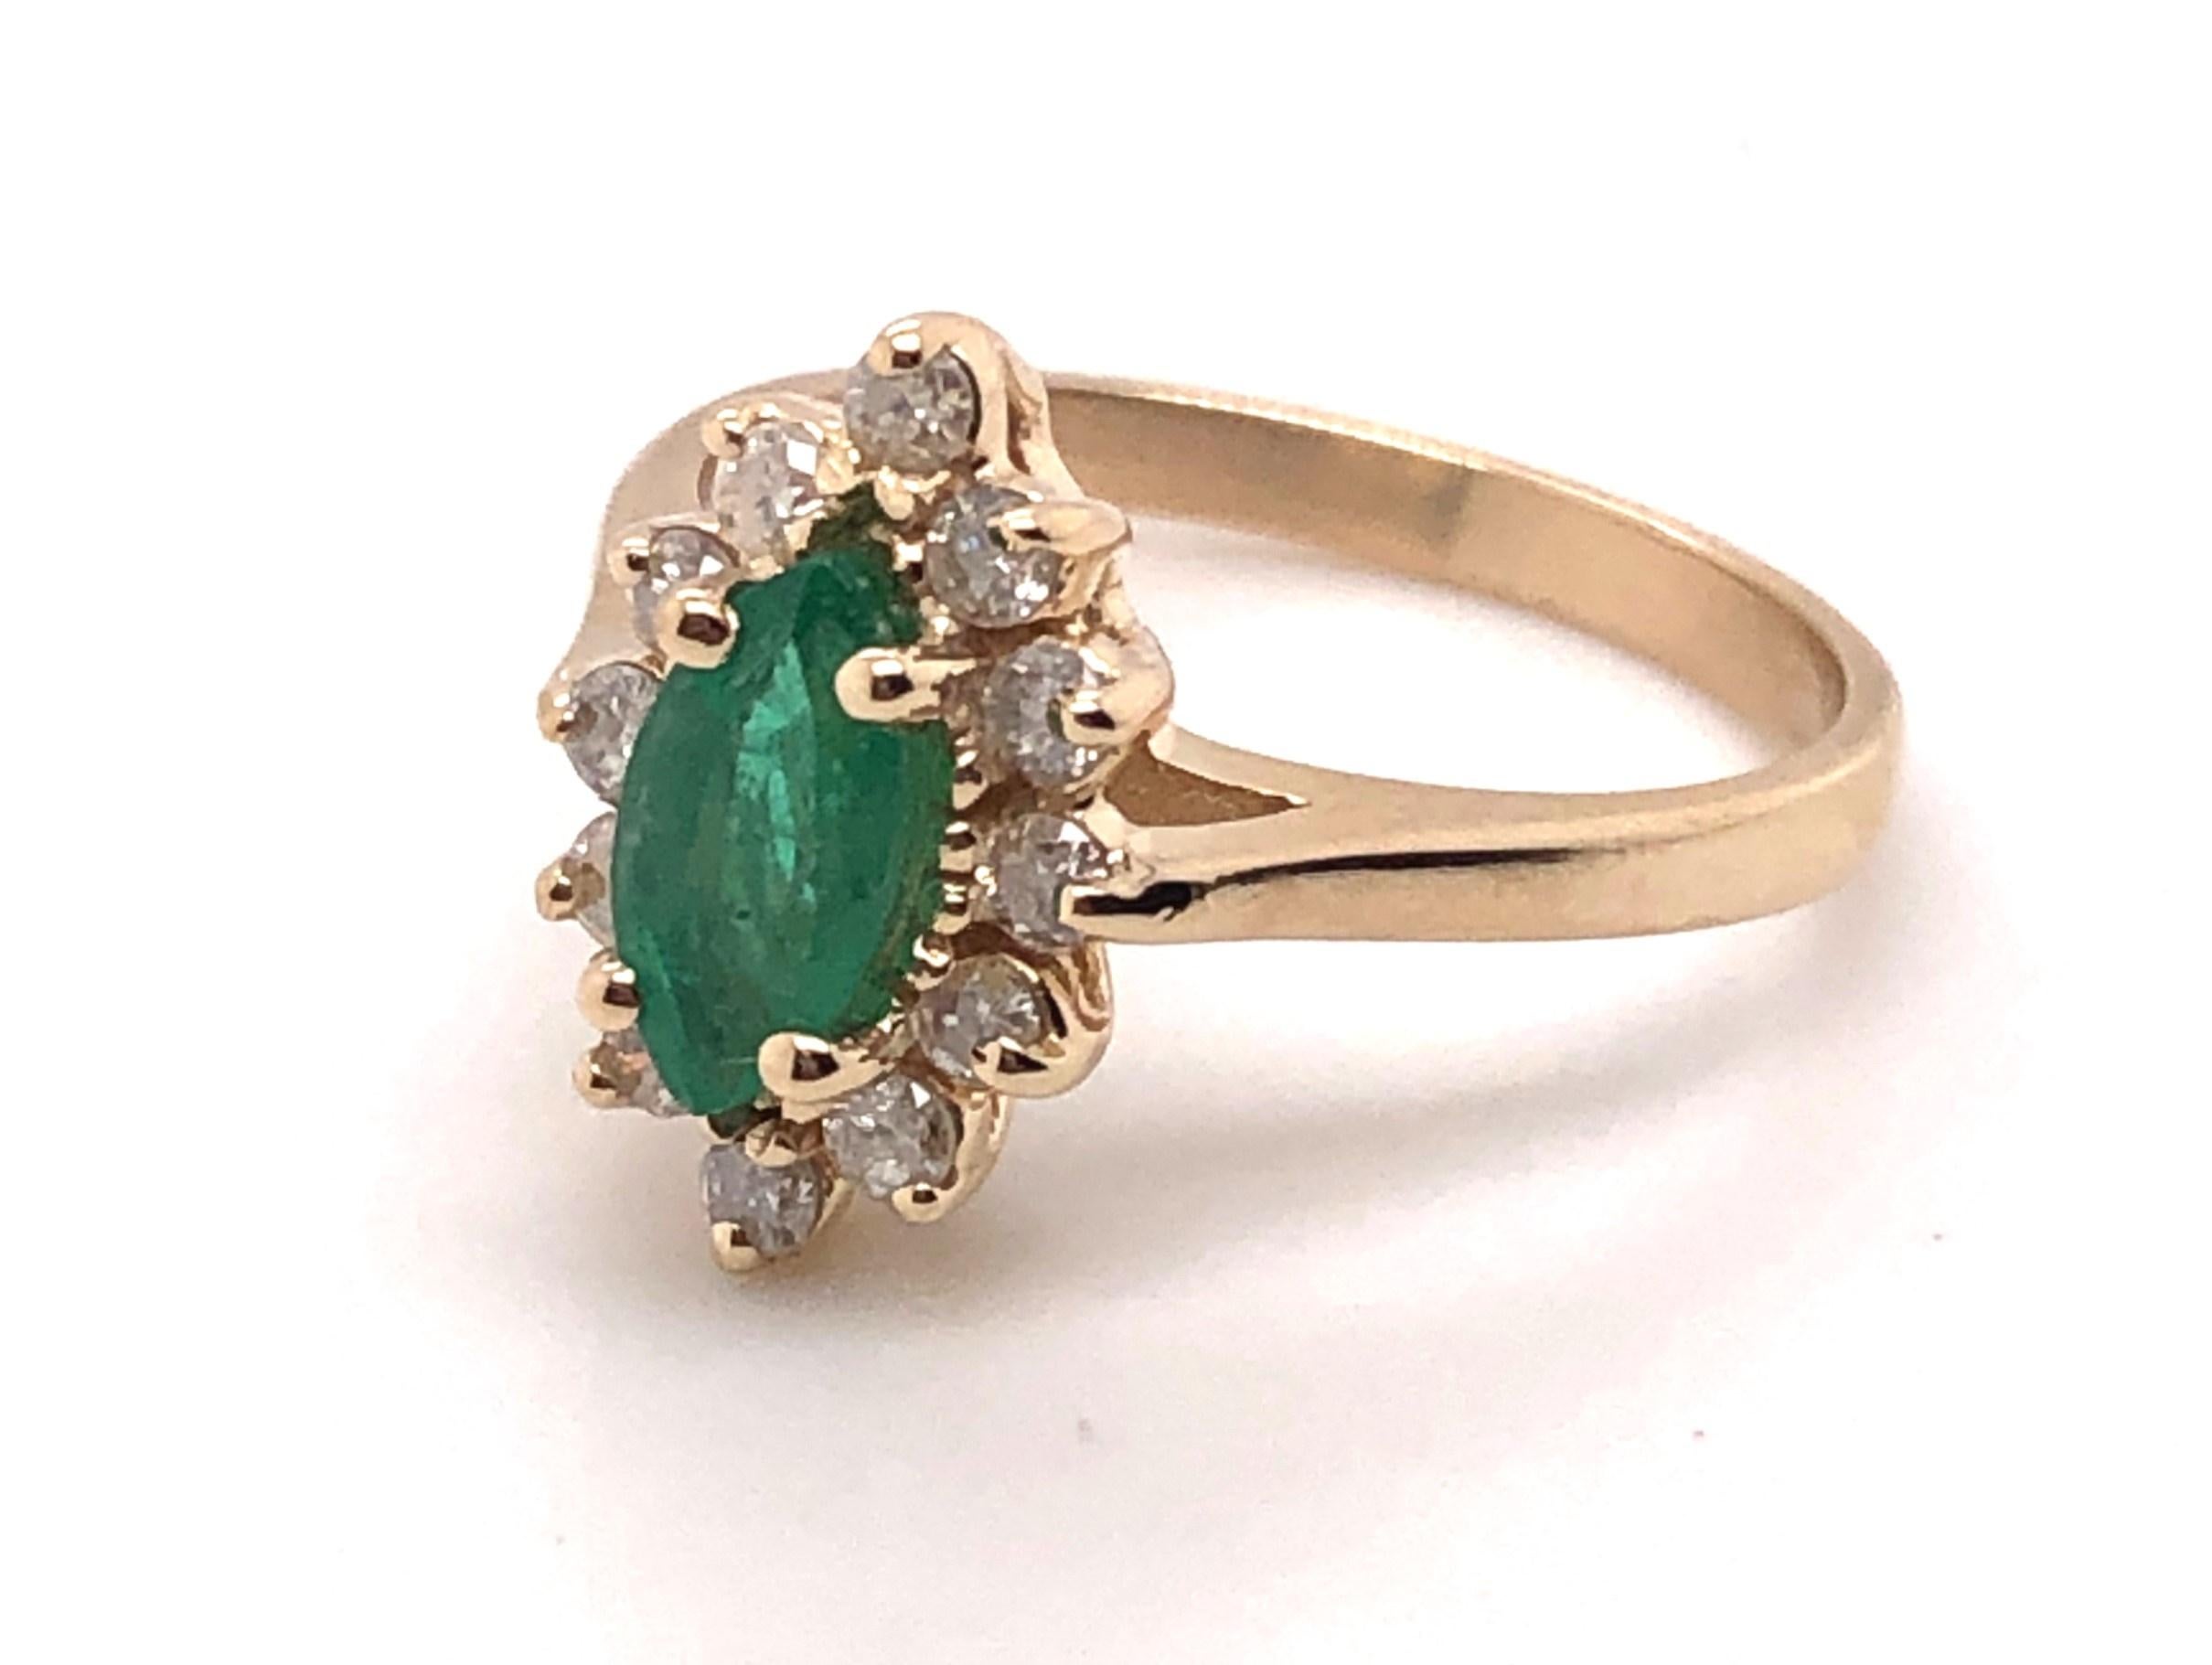 10kt  approximately .48ct marquise cut emerald and approximately .36tcw H-I color I1-I2 clarity diamond halo ring. 

This ring is a finger size 6.50 and can be adjusted. 

The ring measures 3/8 inch wide by 9/16 inch long.